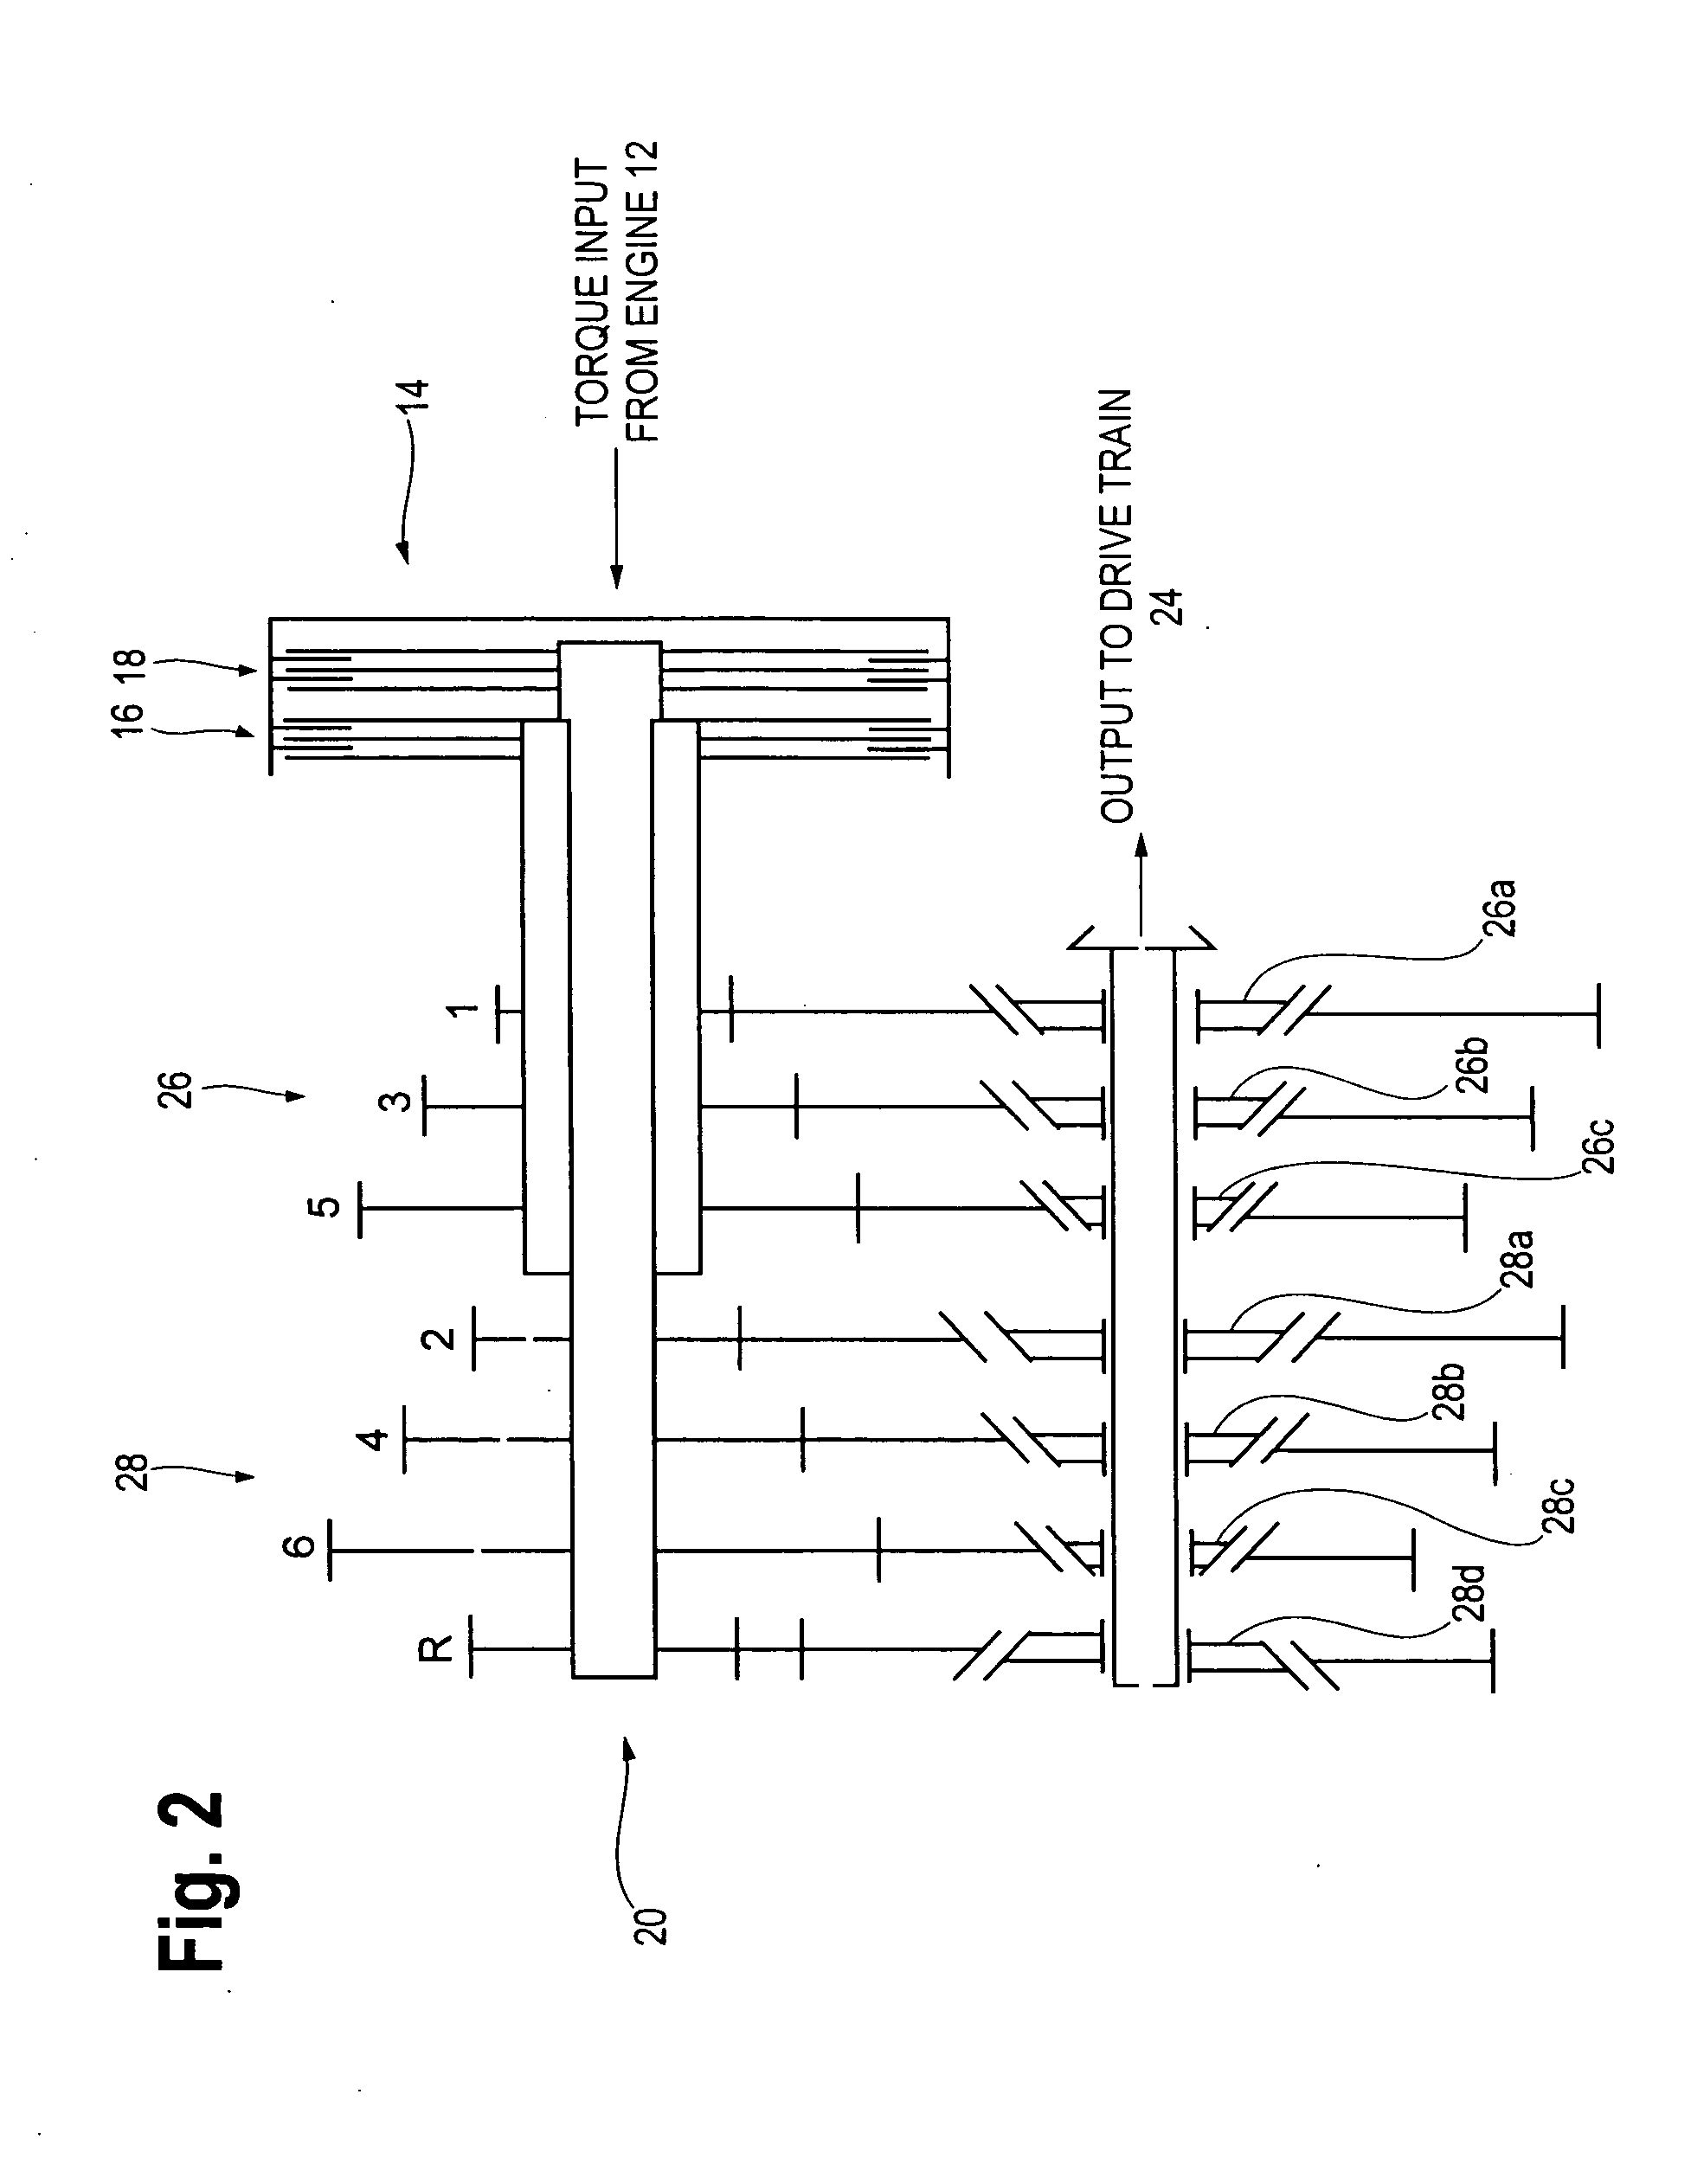 Multi-clutch system with blended output system for powertrain transmissions